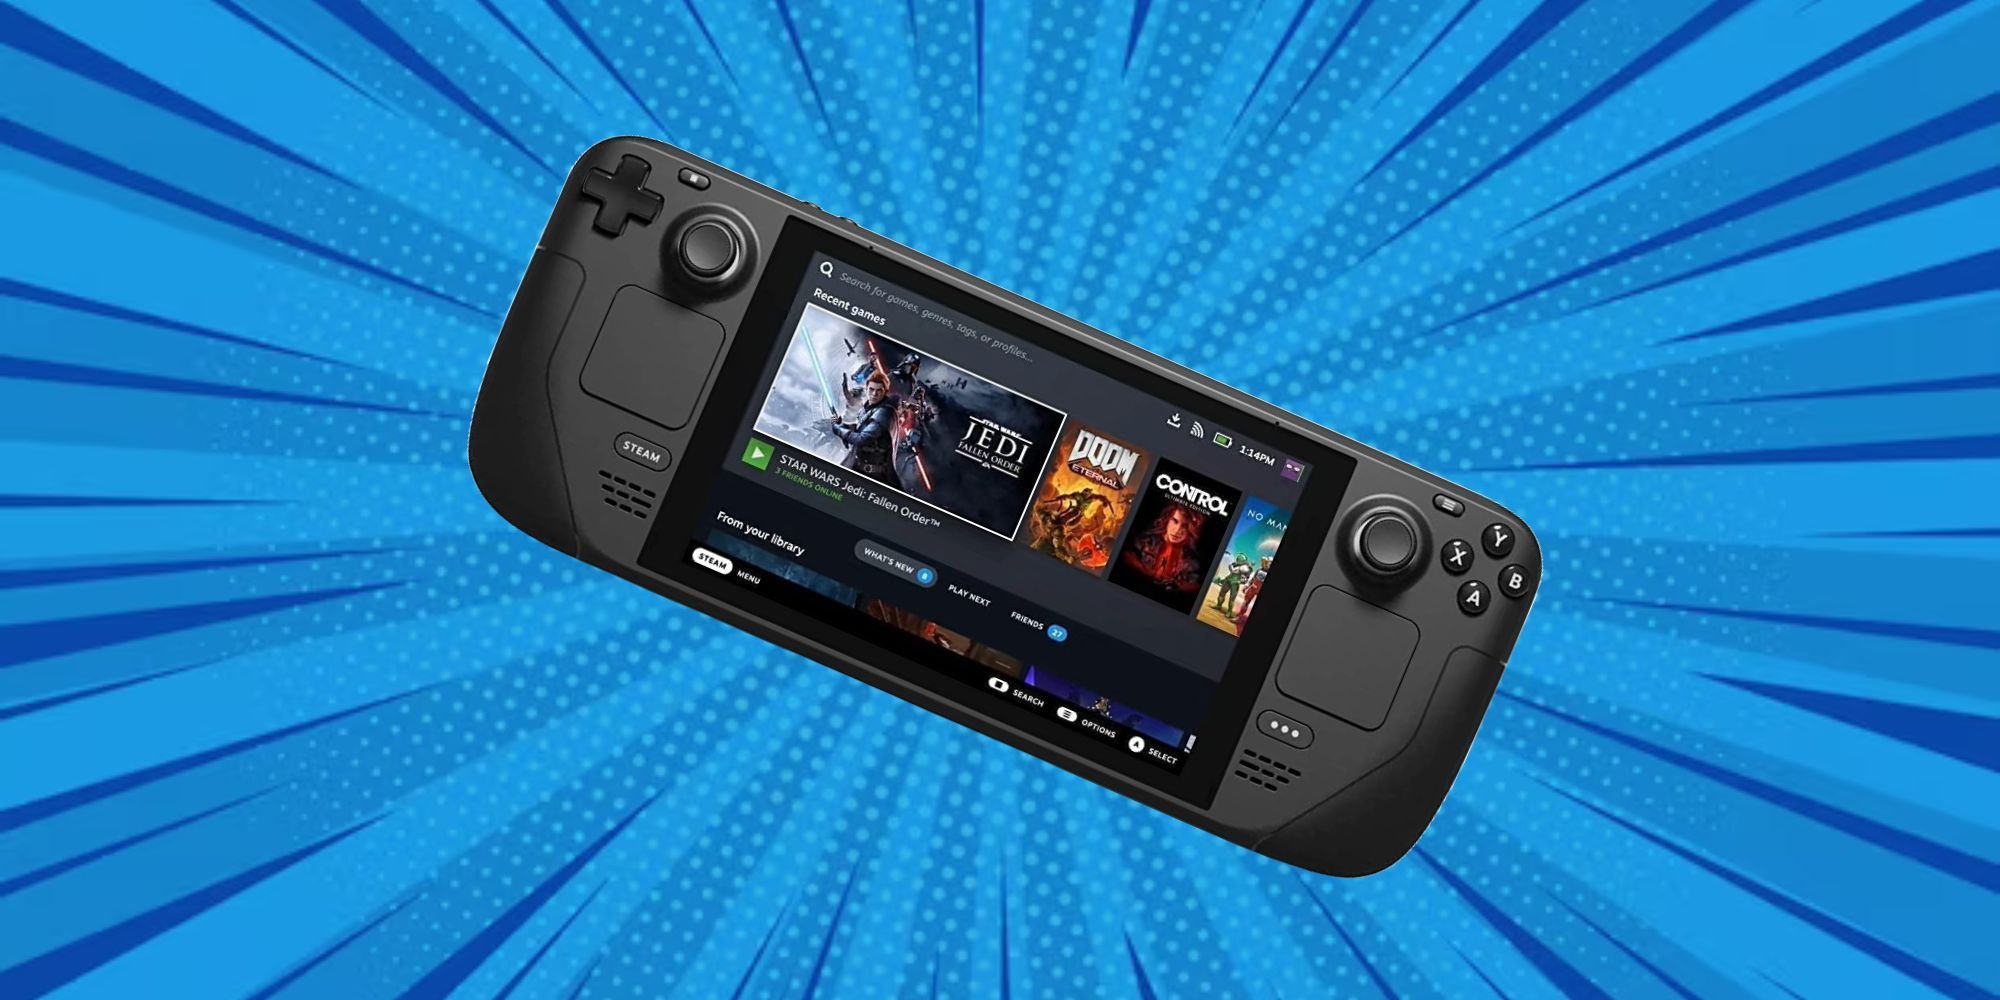 How To Use The Steam Deck As A Handheld PC